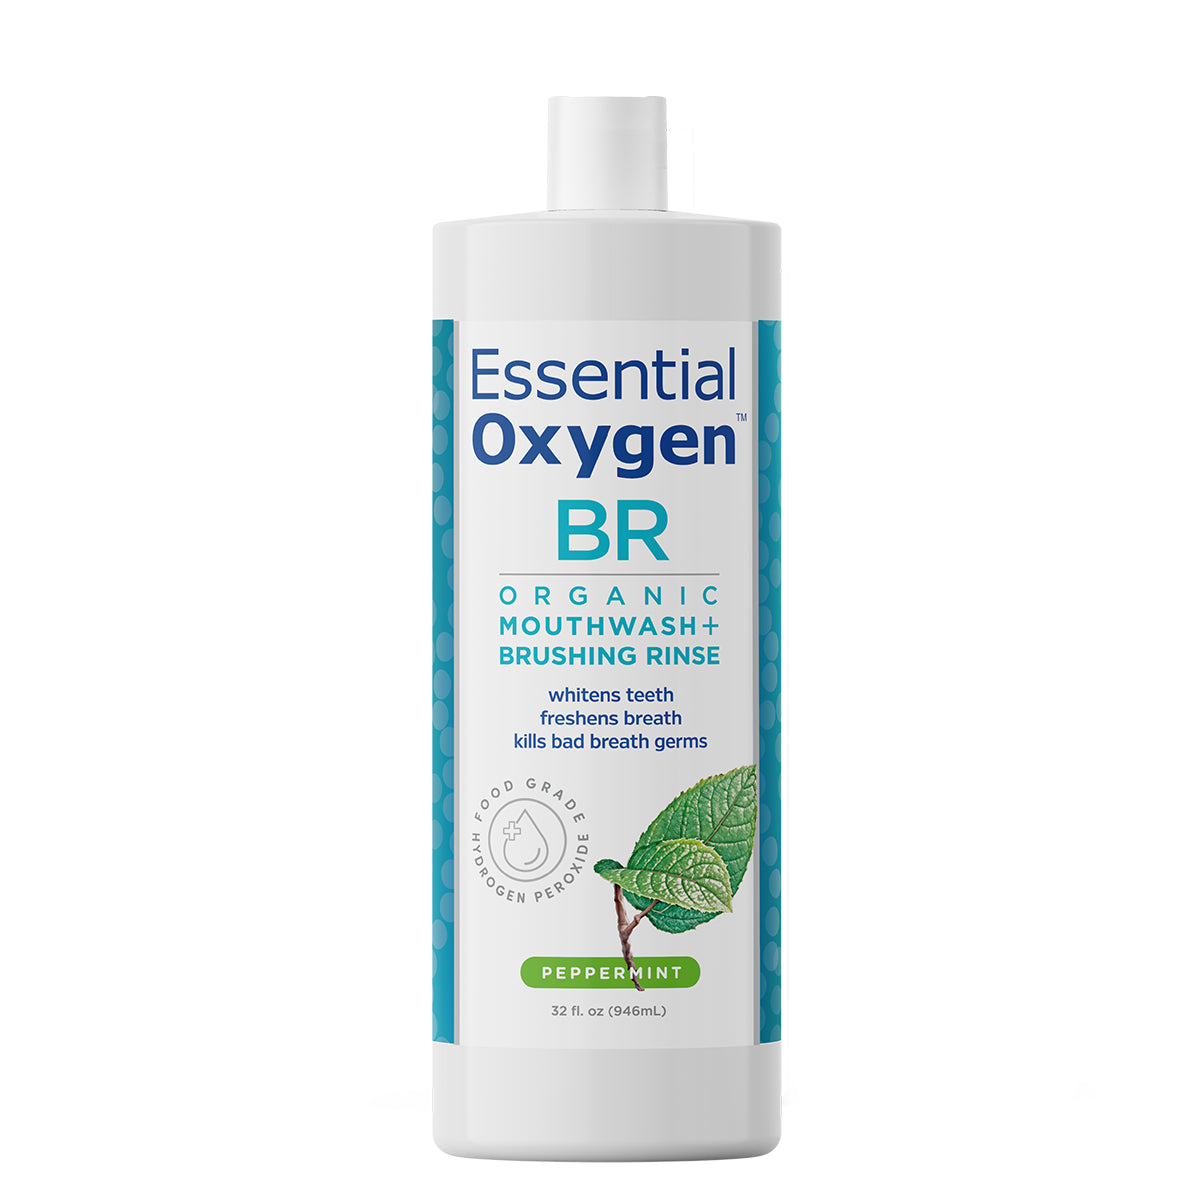 Front view of a single 32 oz (946 ml) bottle of Essential Oxygen BR Organic Mouthwash and Brushing Rinse in Peppermint flavor